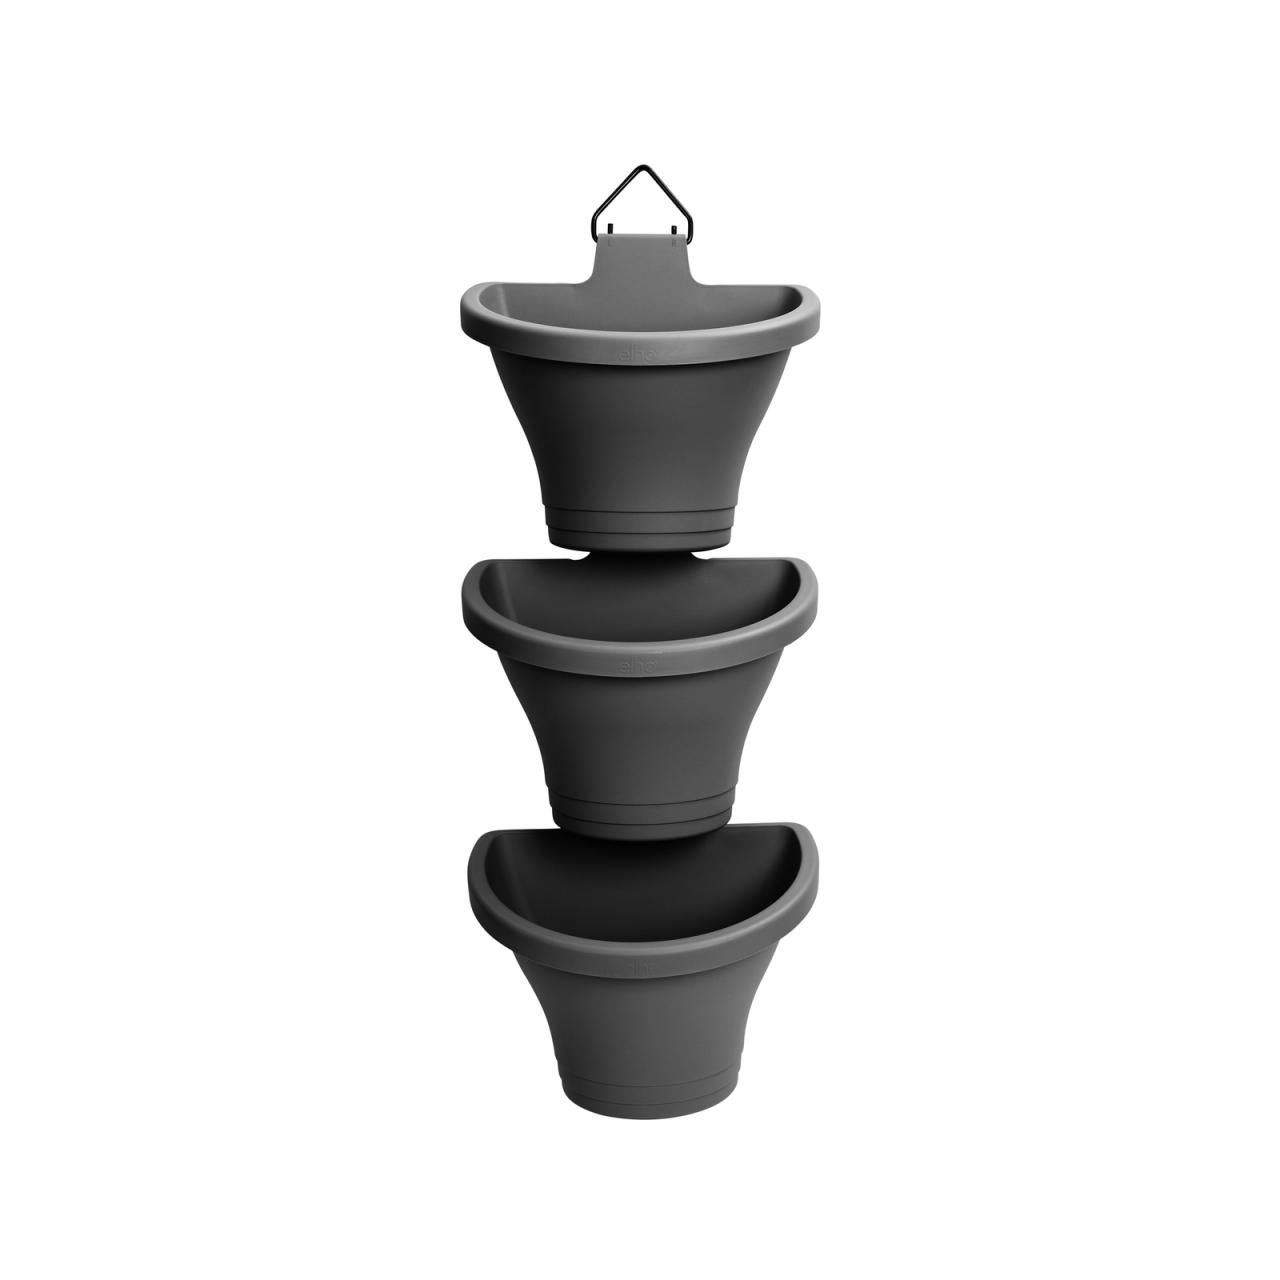 Hanging Plants Indoor | Bunnings Elho Pots: A Guide to Design, Durability, and Versatility